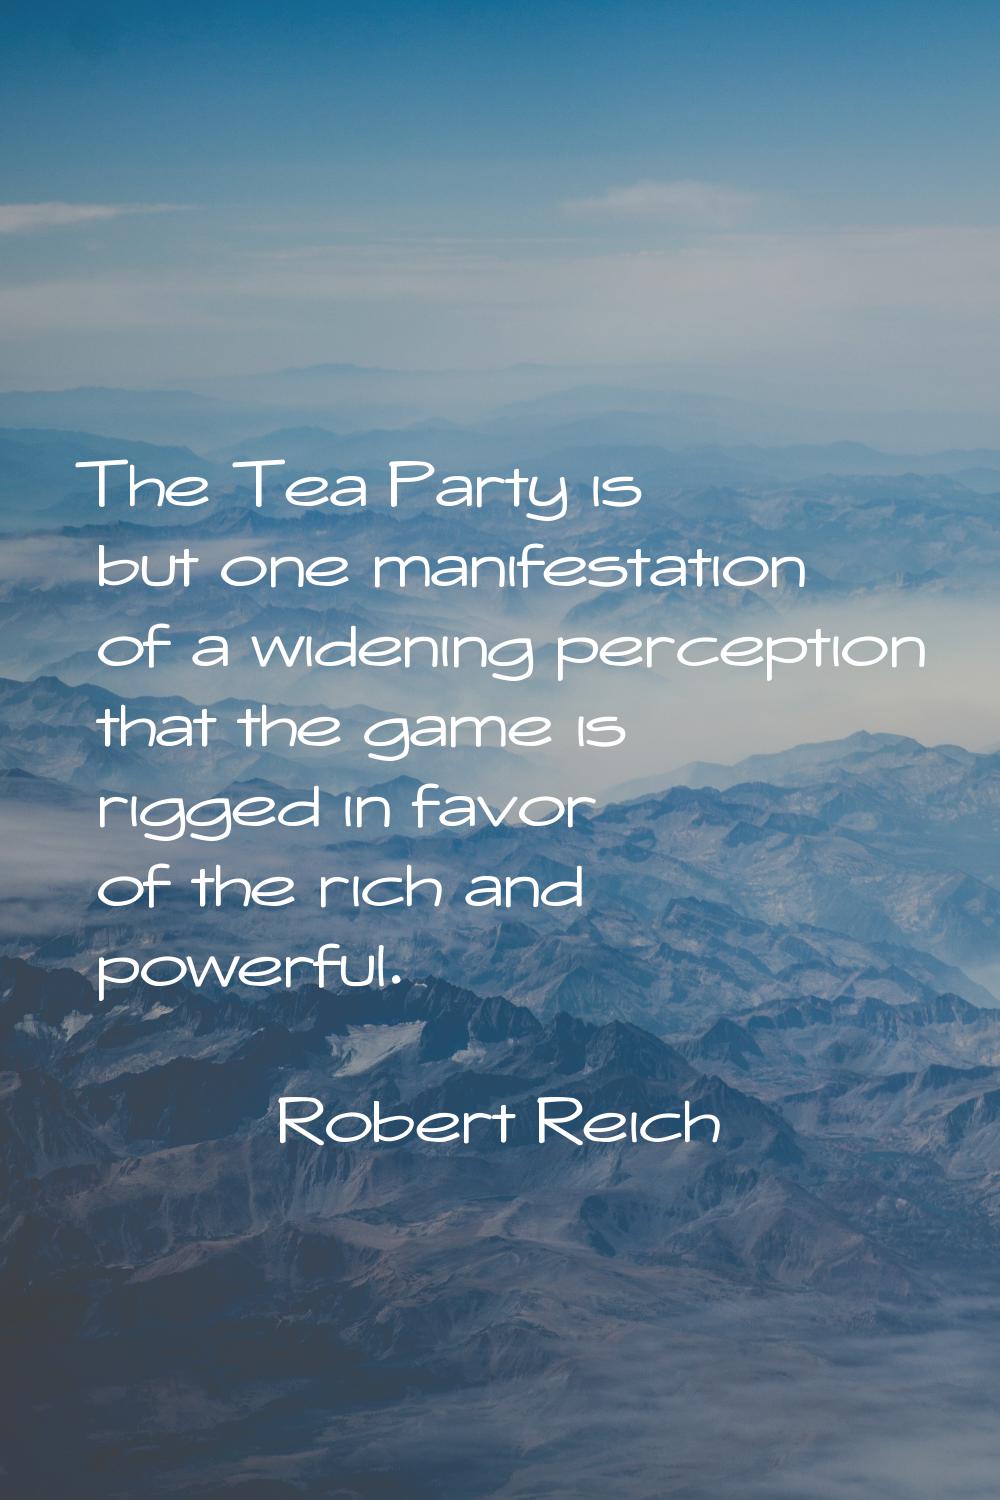 The Tea Party is but one manifestation of a widening perception that the game is rigged in favor of